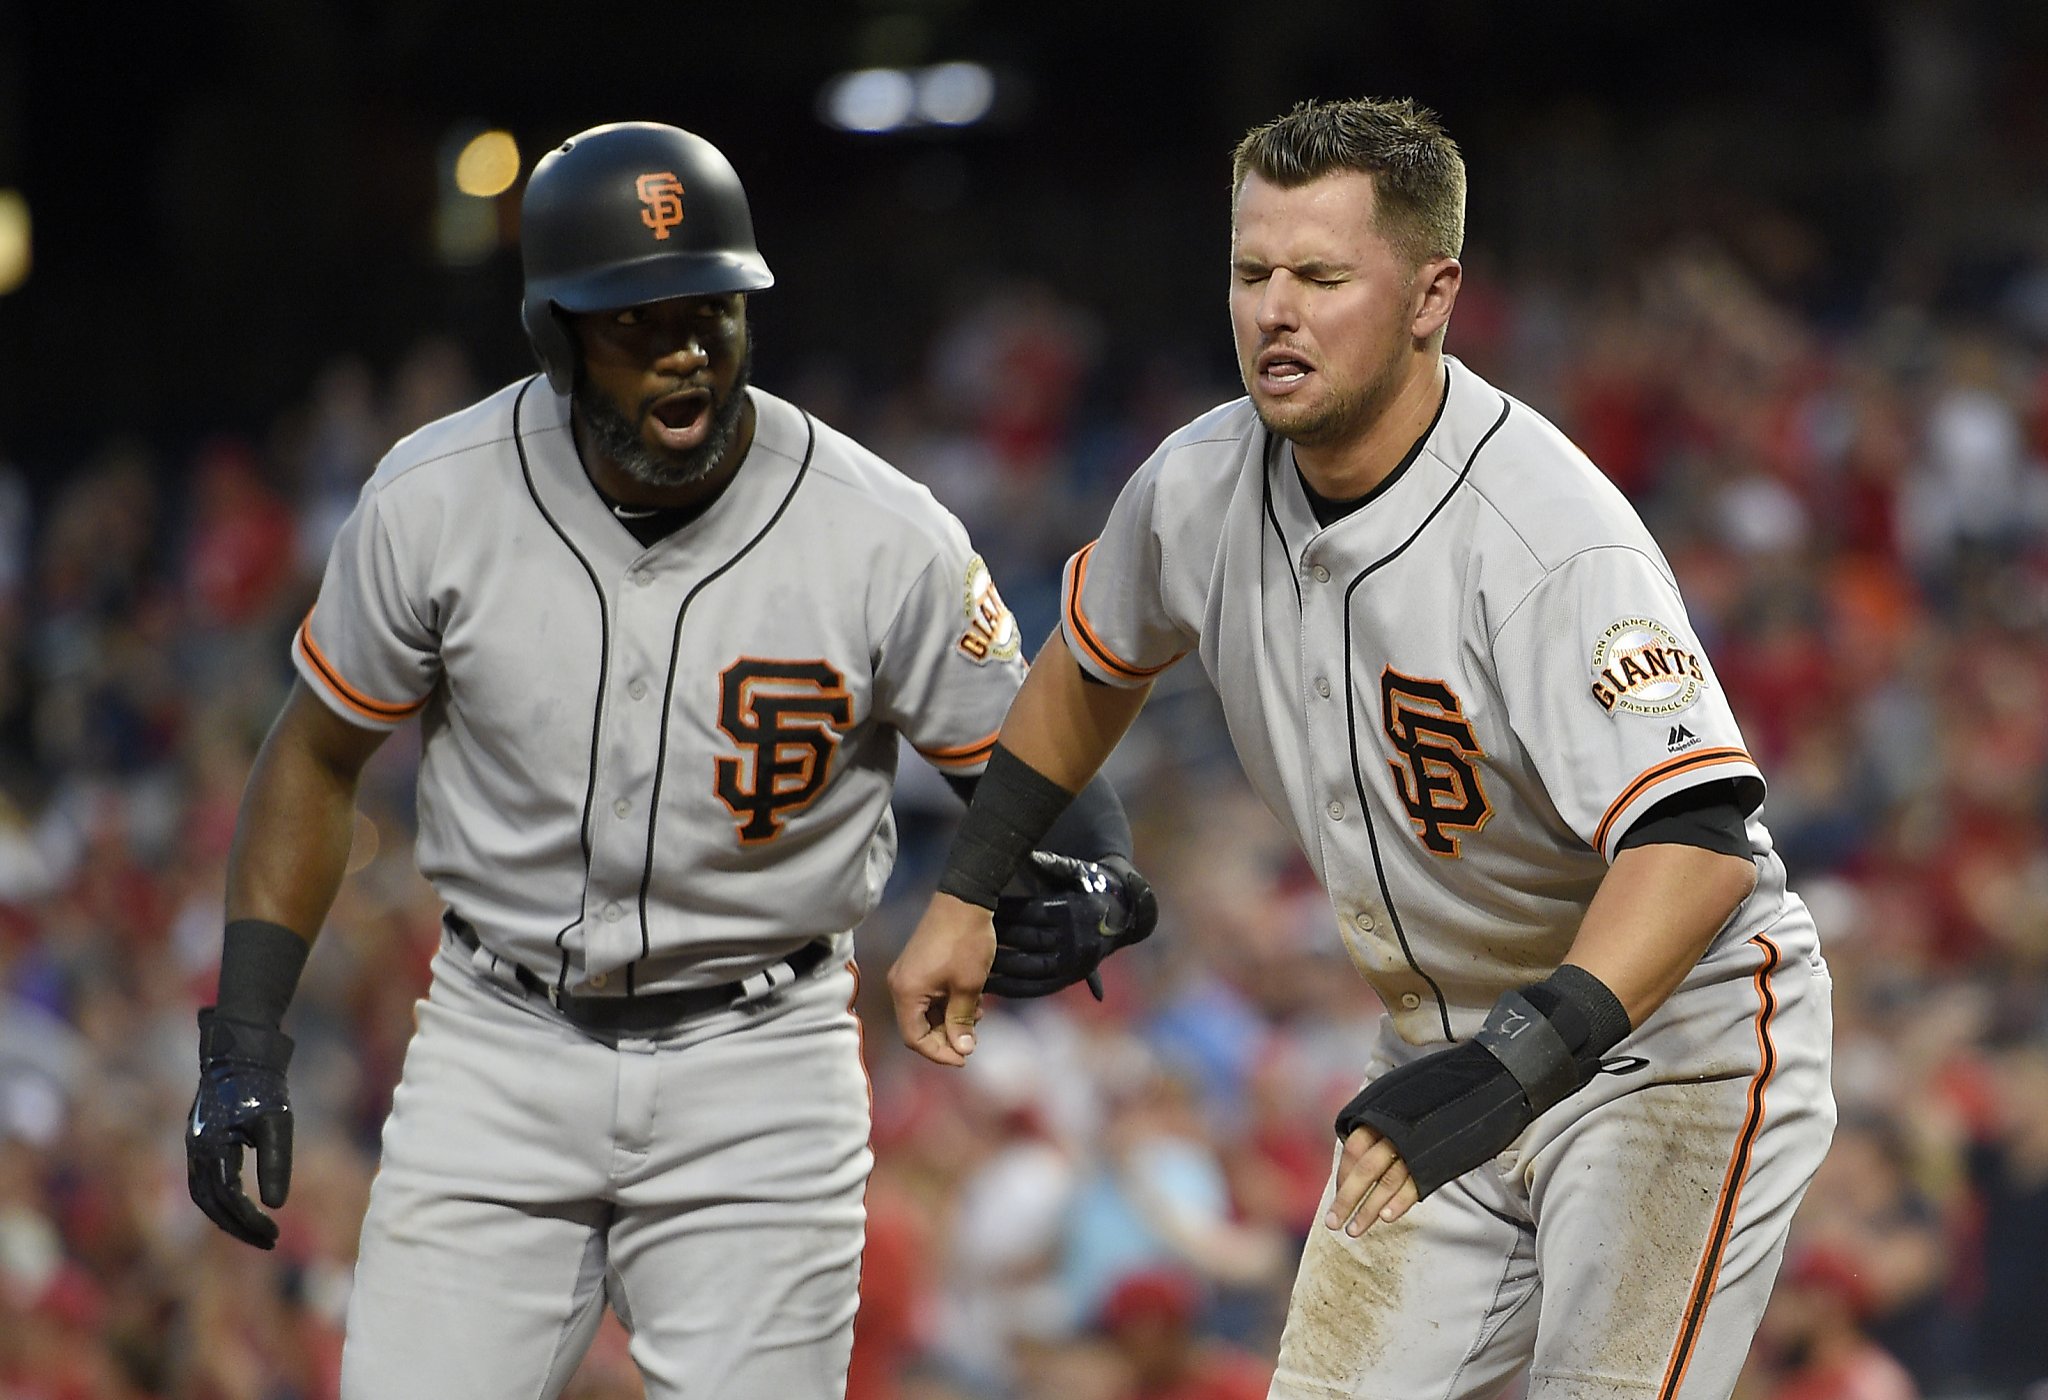 Giants receive another blast from Joe Panik and near perfection